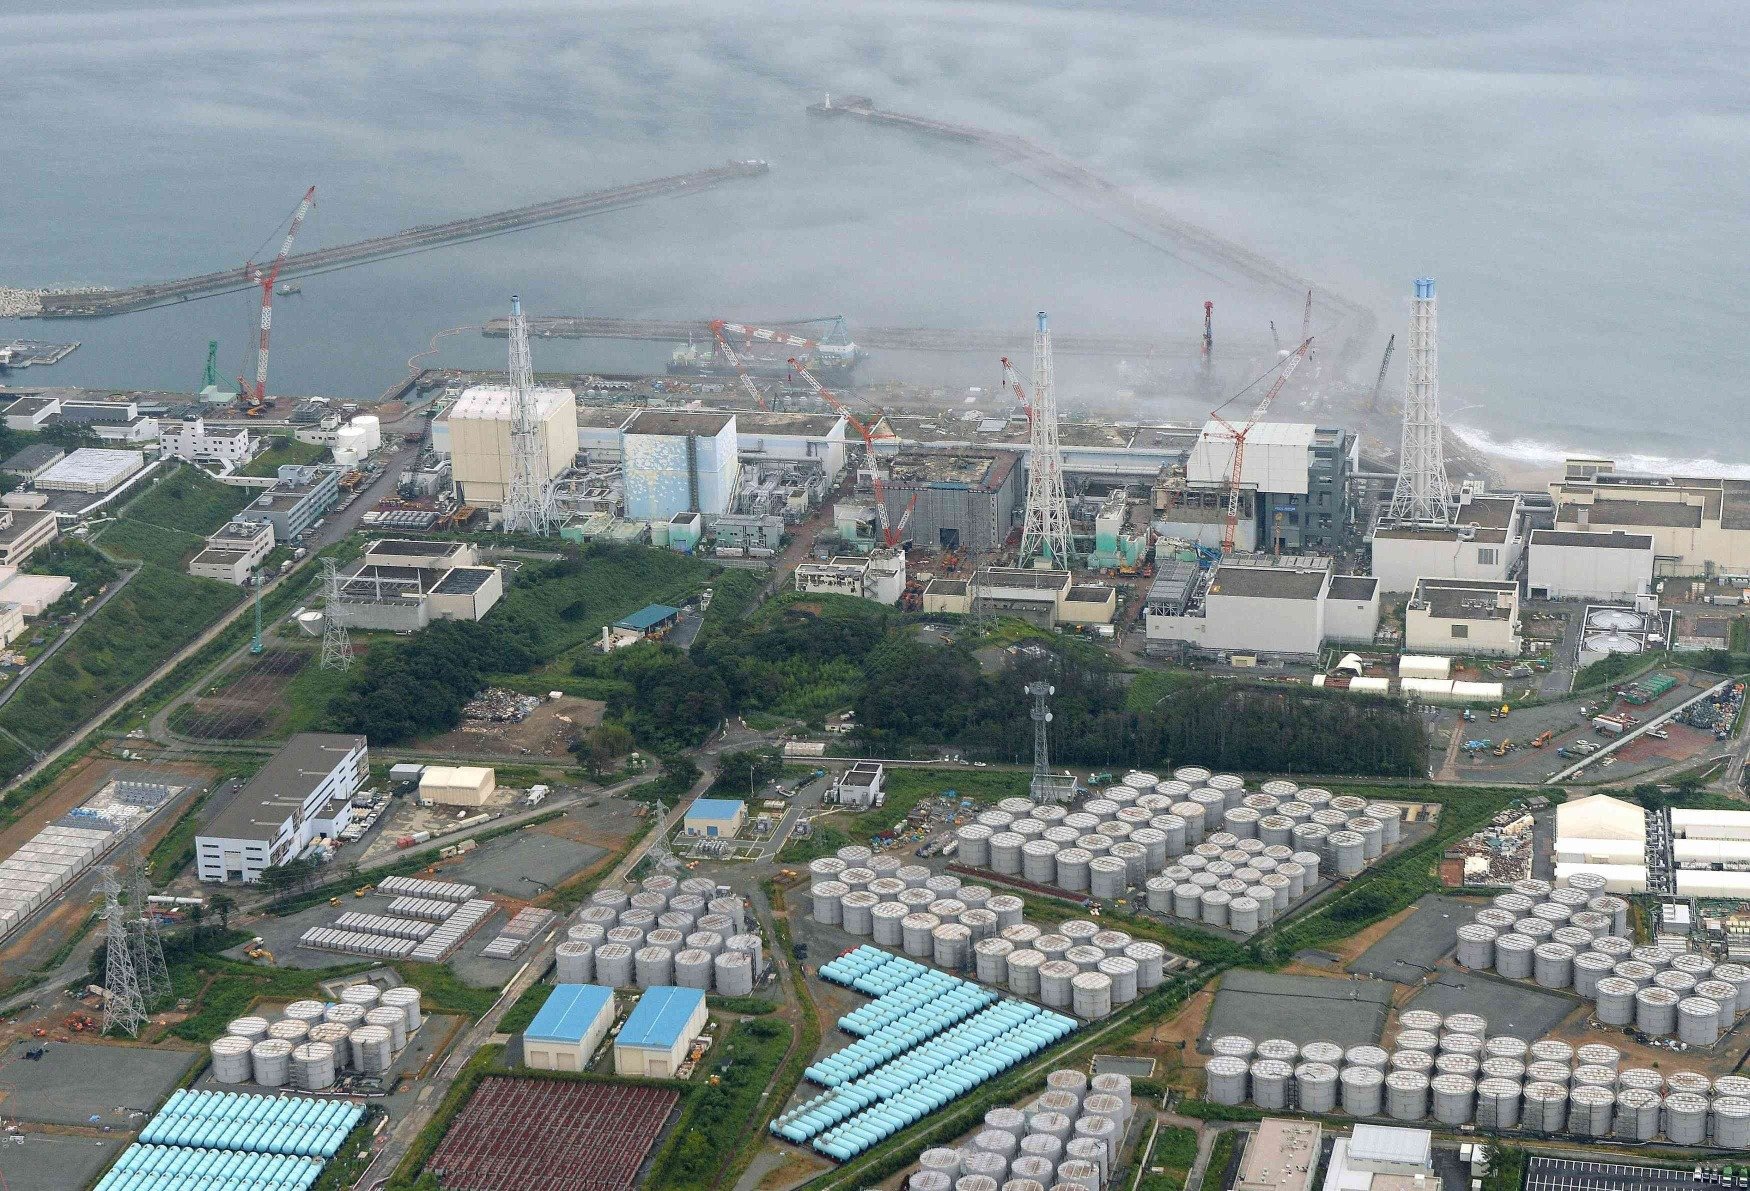 An aerial view shows Tokyo Electric Power Company Fukushima Daiichi nuclear power plant and its contaminated water storage tanks. Photo: Reuters